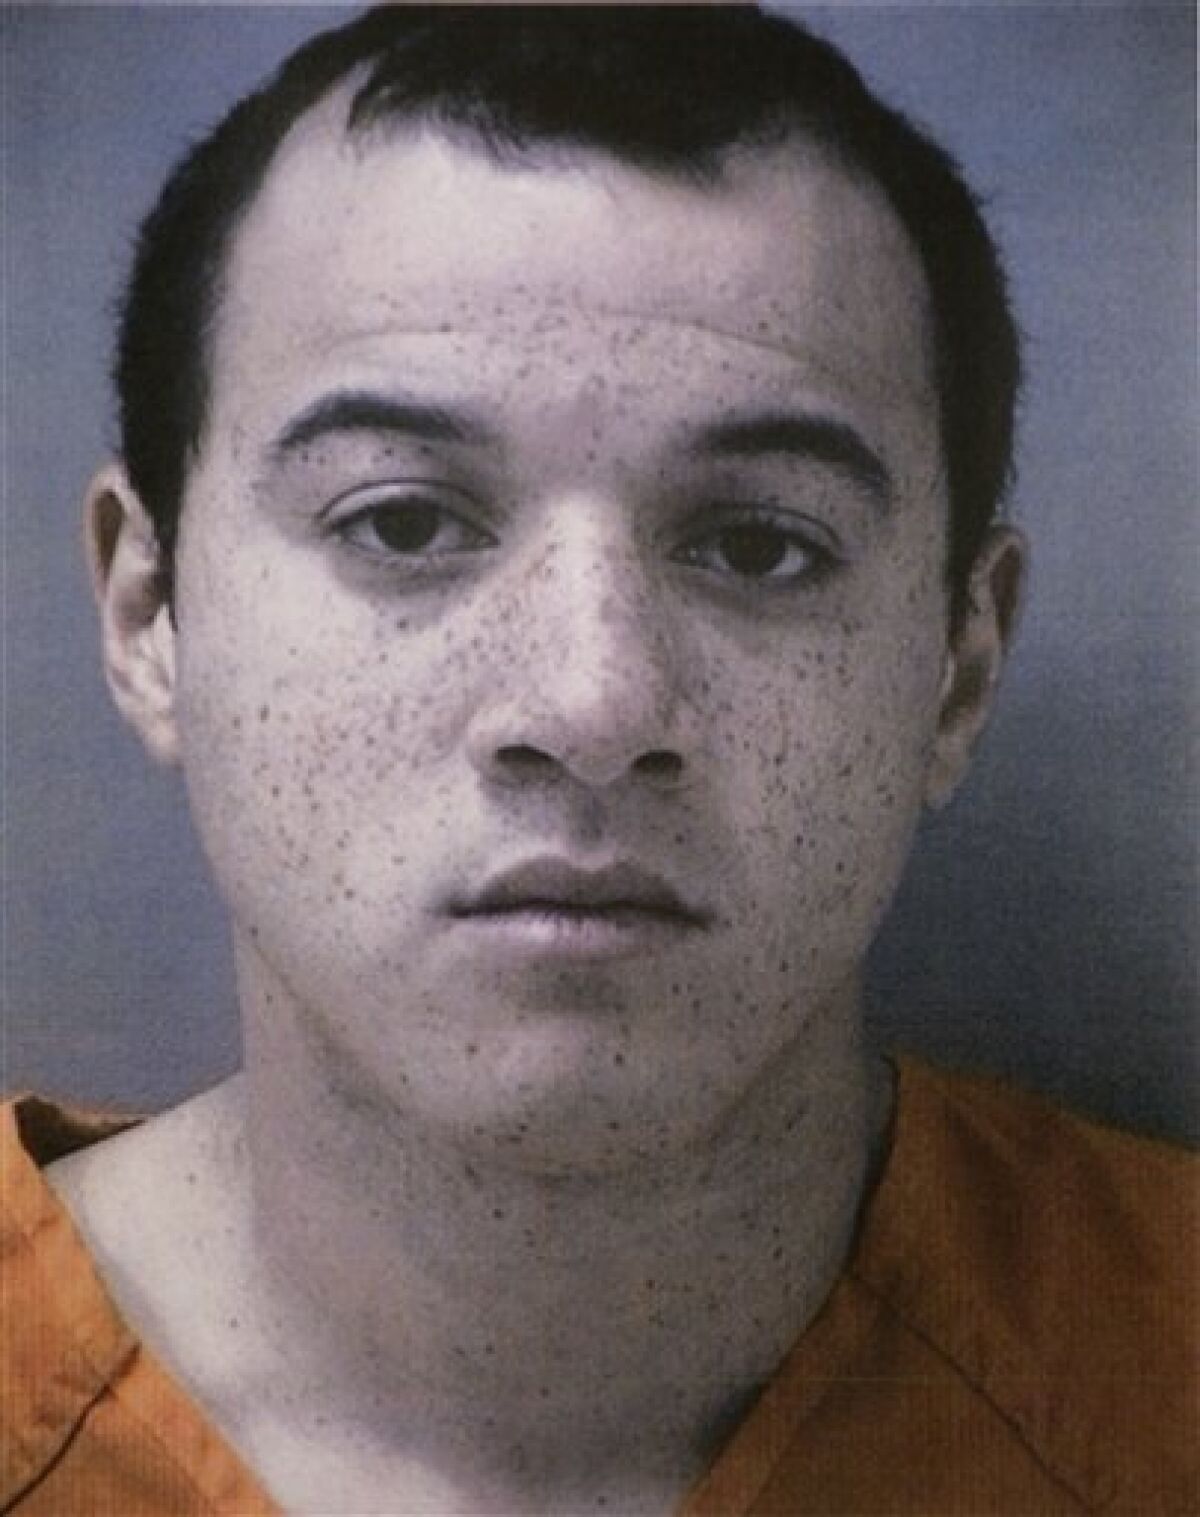 This booking photo provided Wednesday Dec. 7, 2011, by the Cherokee Sheriff’s Department, shows 20-year-old Ryan Brunn of Canton after his arrest for the murder in the beating death of a 7-year-old Jorelys Rivera, who was abducted and killed at an apartment complex and her body left in a trash bin. (AP Photo/Courtesy of the Cherokee Sheriff’s Department)